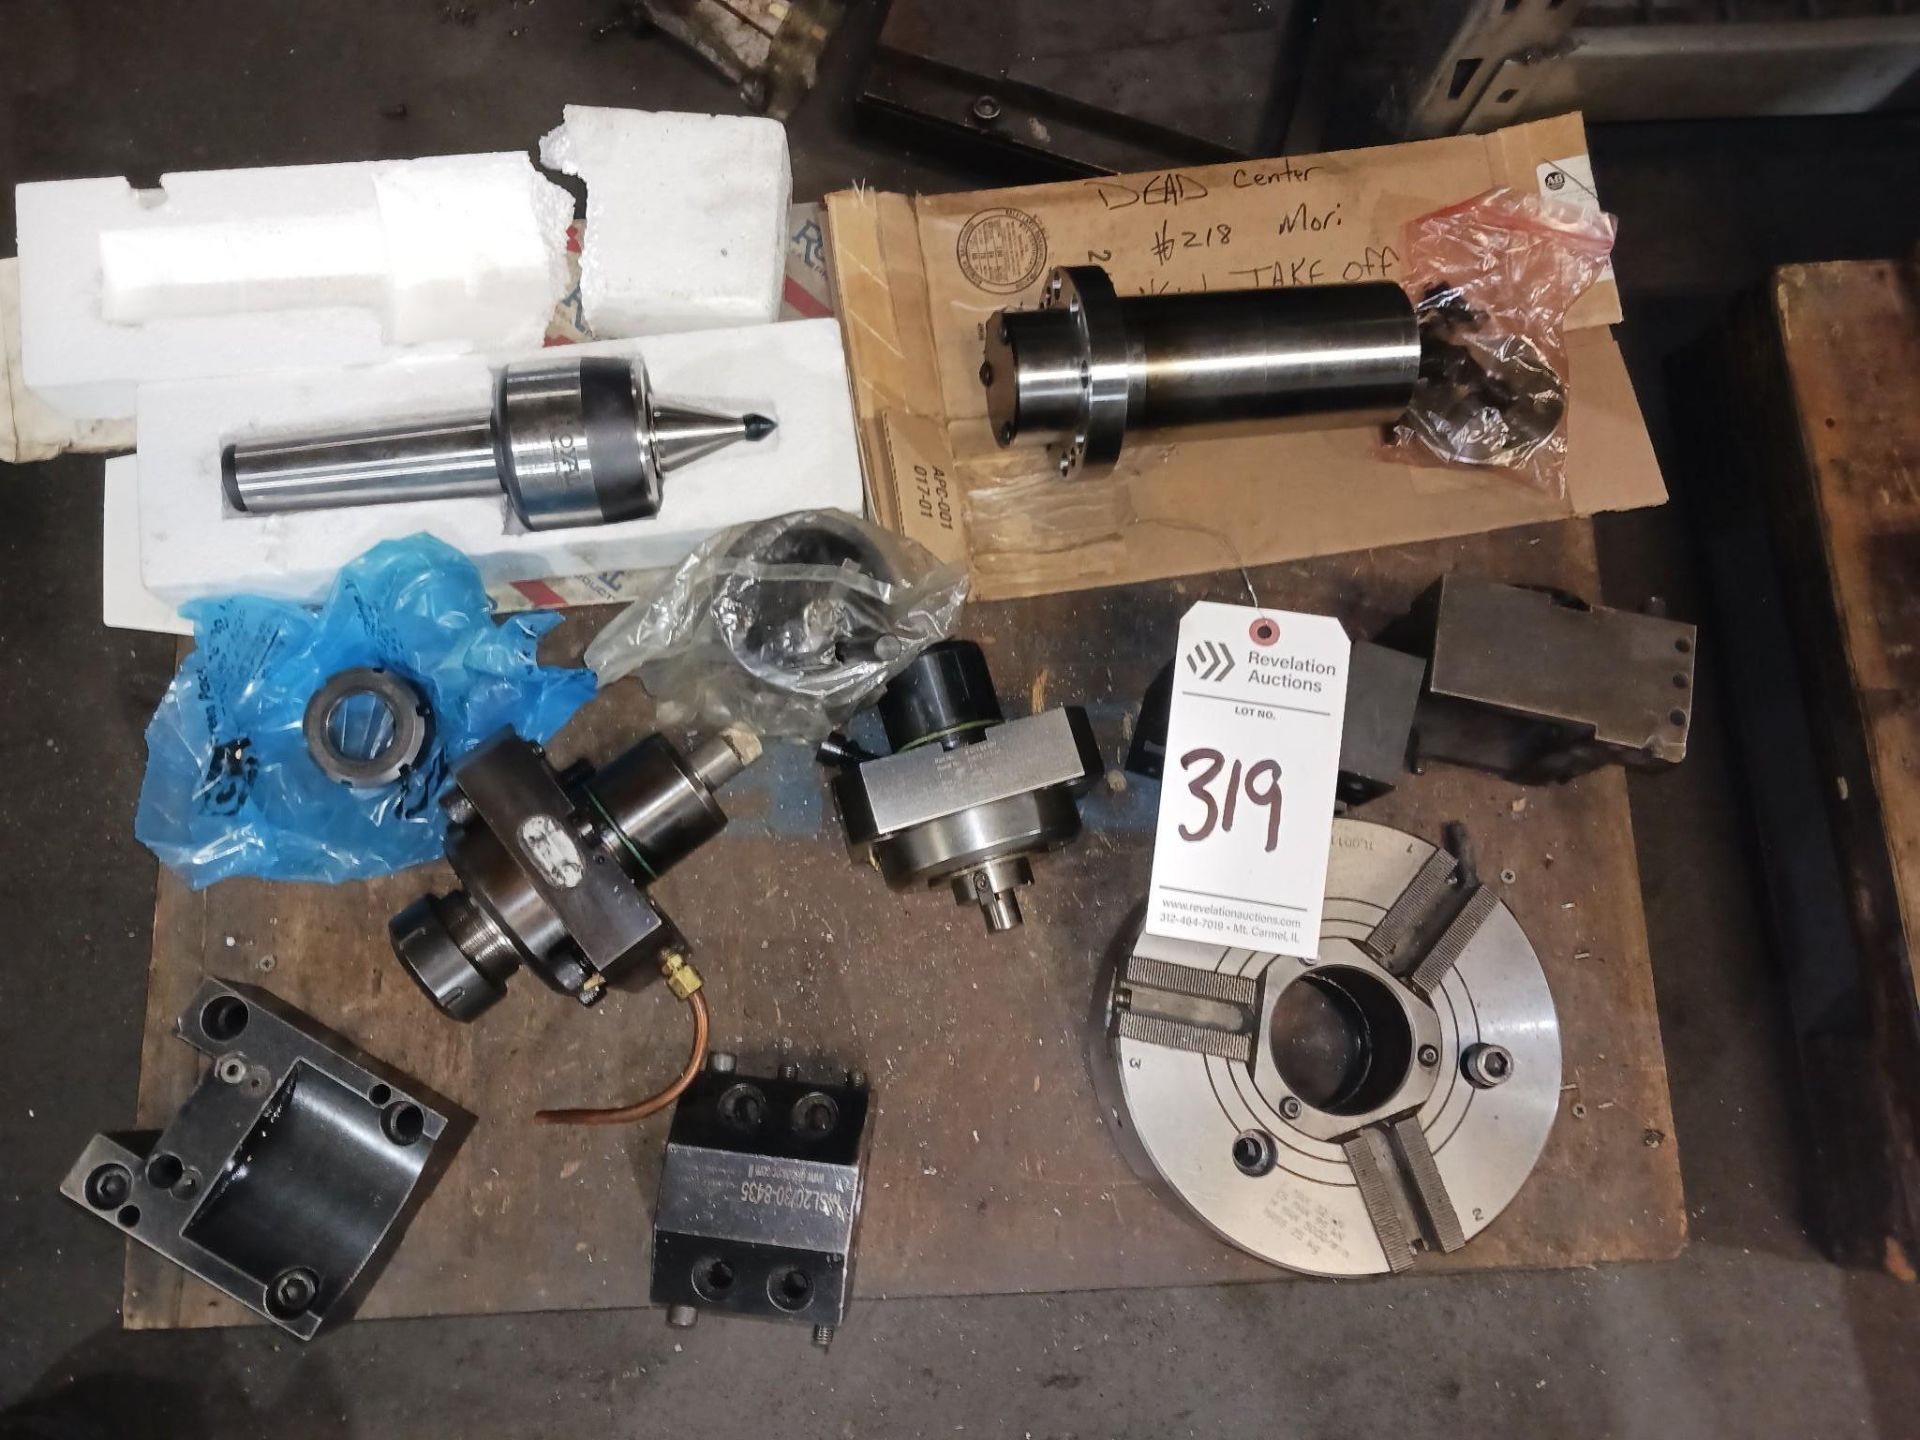 MORI NL-2000 TOOLING INCLUDING LOVE TOOL HOLDERS AND 8" CHUCK, ROYAL MT5 CENTER, MP4 DEAD CENTER